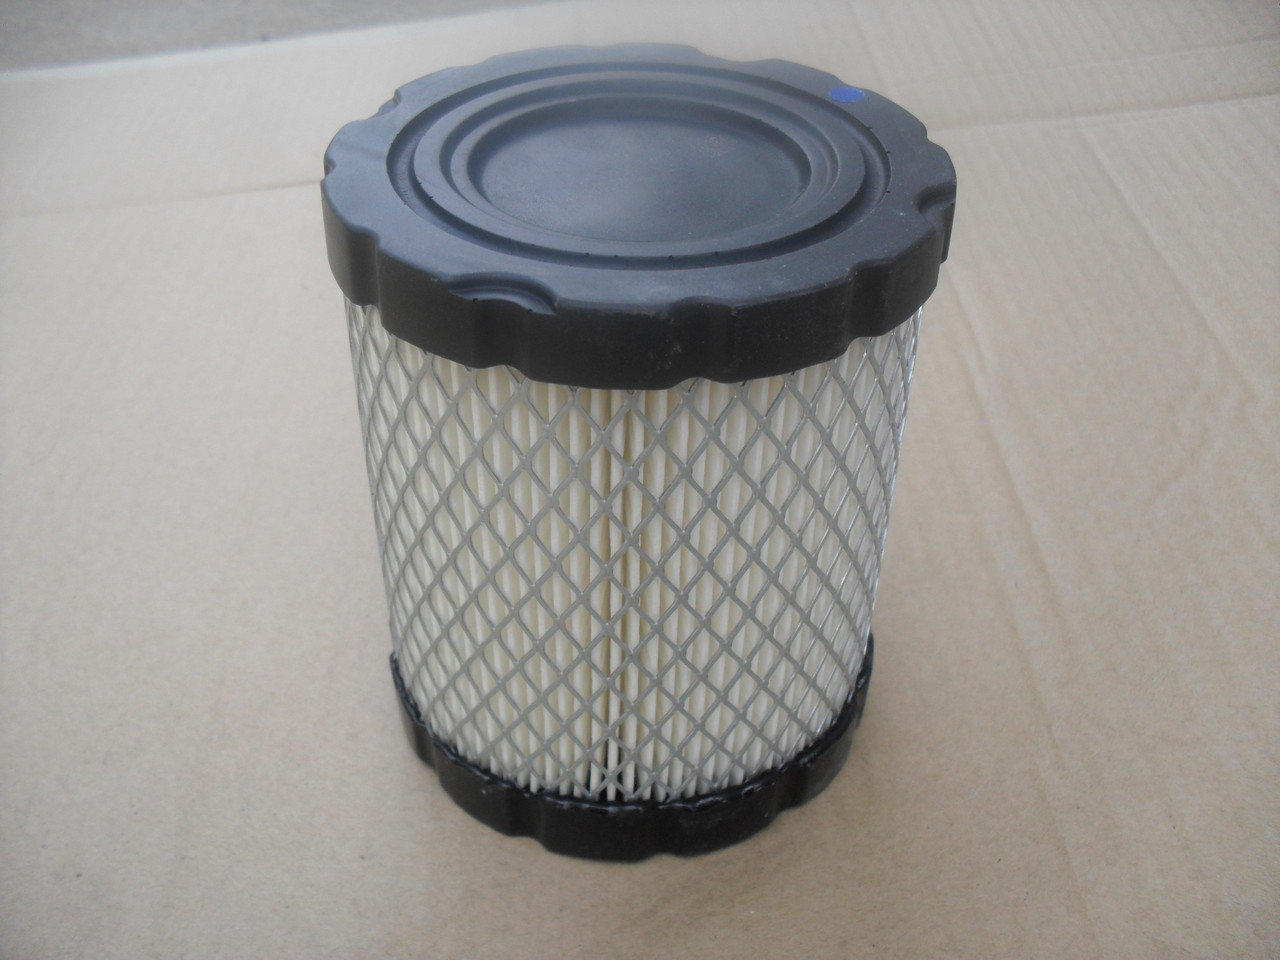 Air Filter for Briggs and Stratton 4250, 794935, 798897 & 